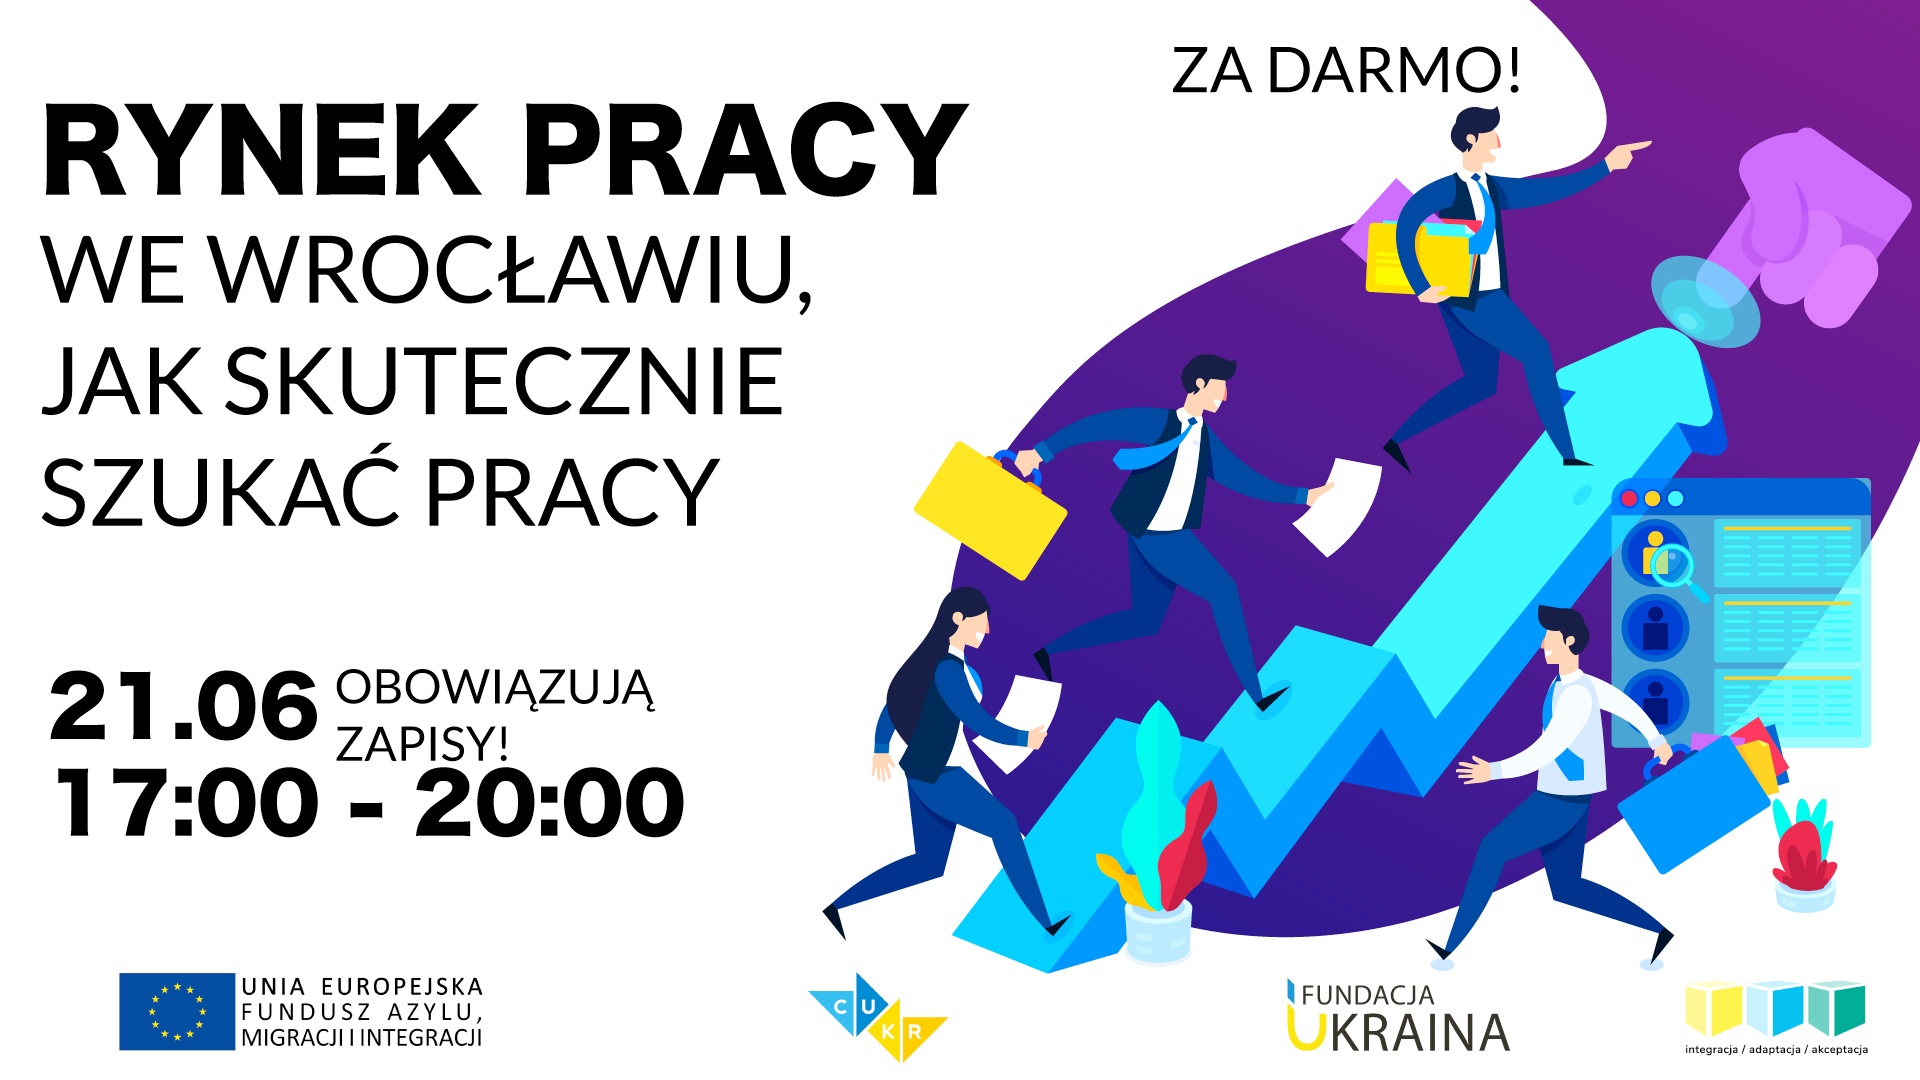 Seminar “The Labor Market of Wroclaw, Ways to Find a Job” on the 21 of June!